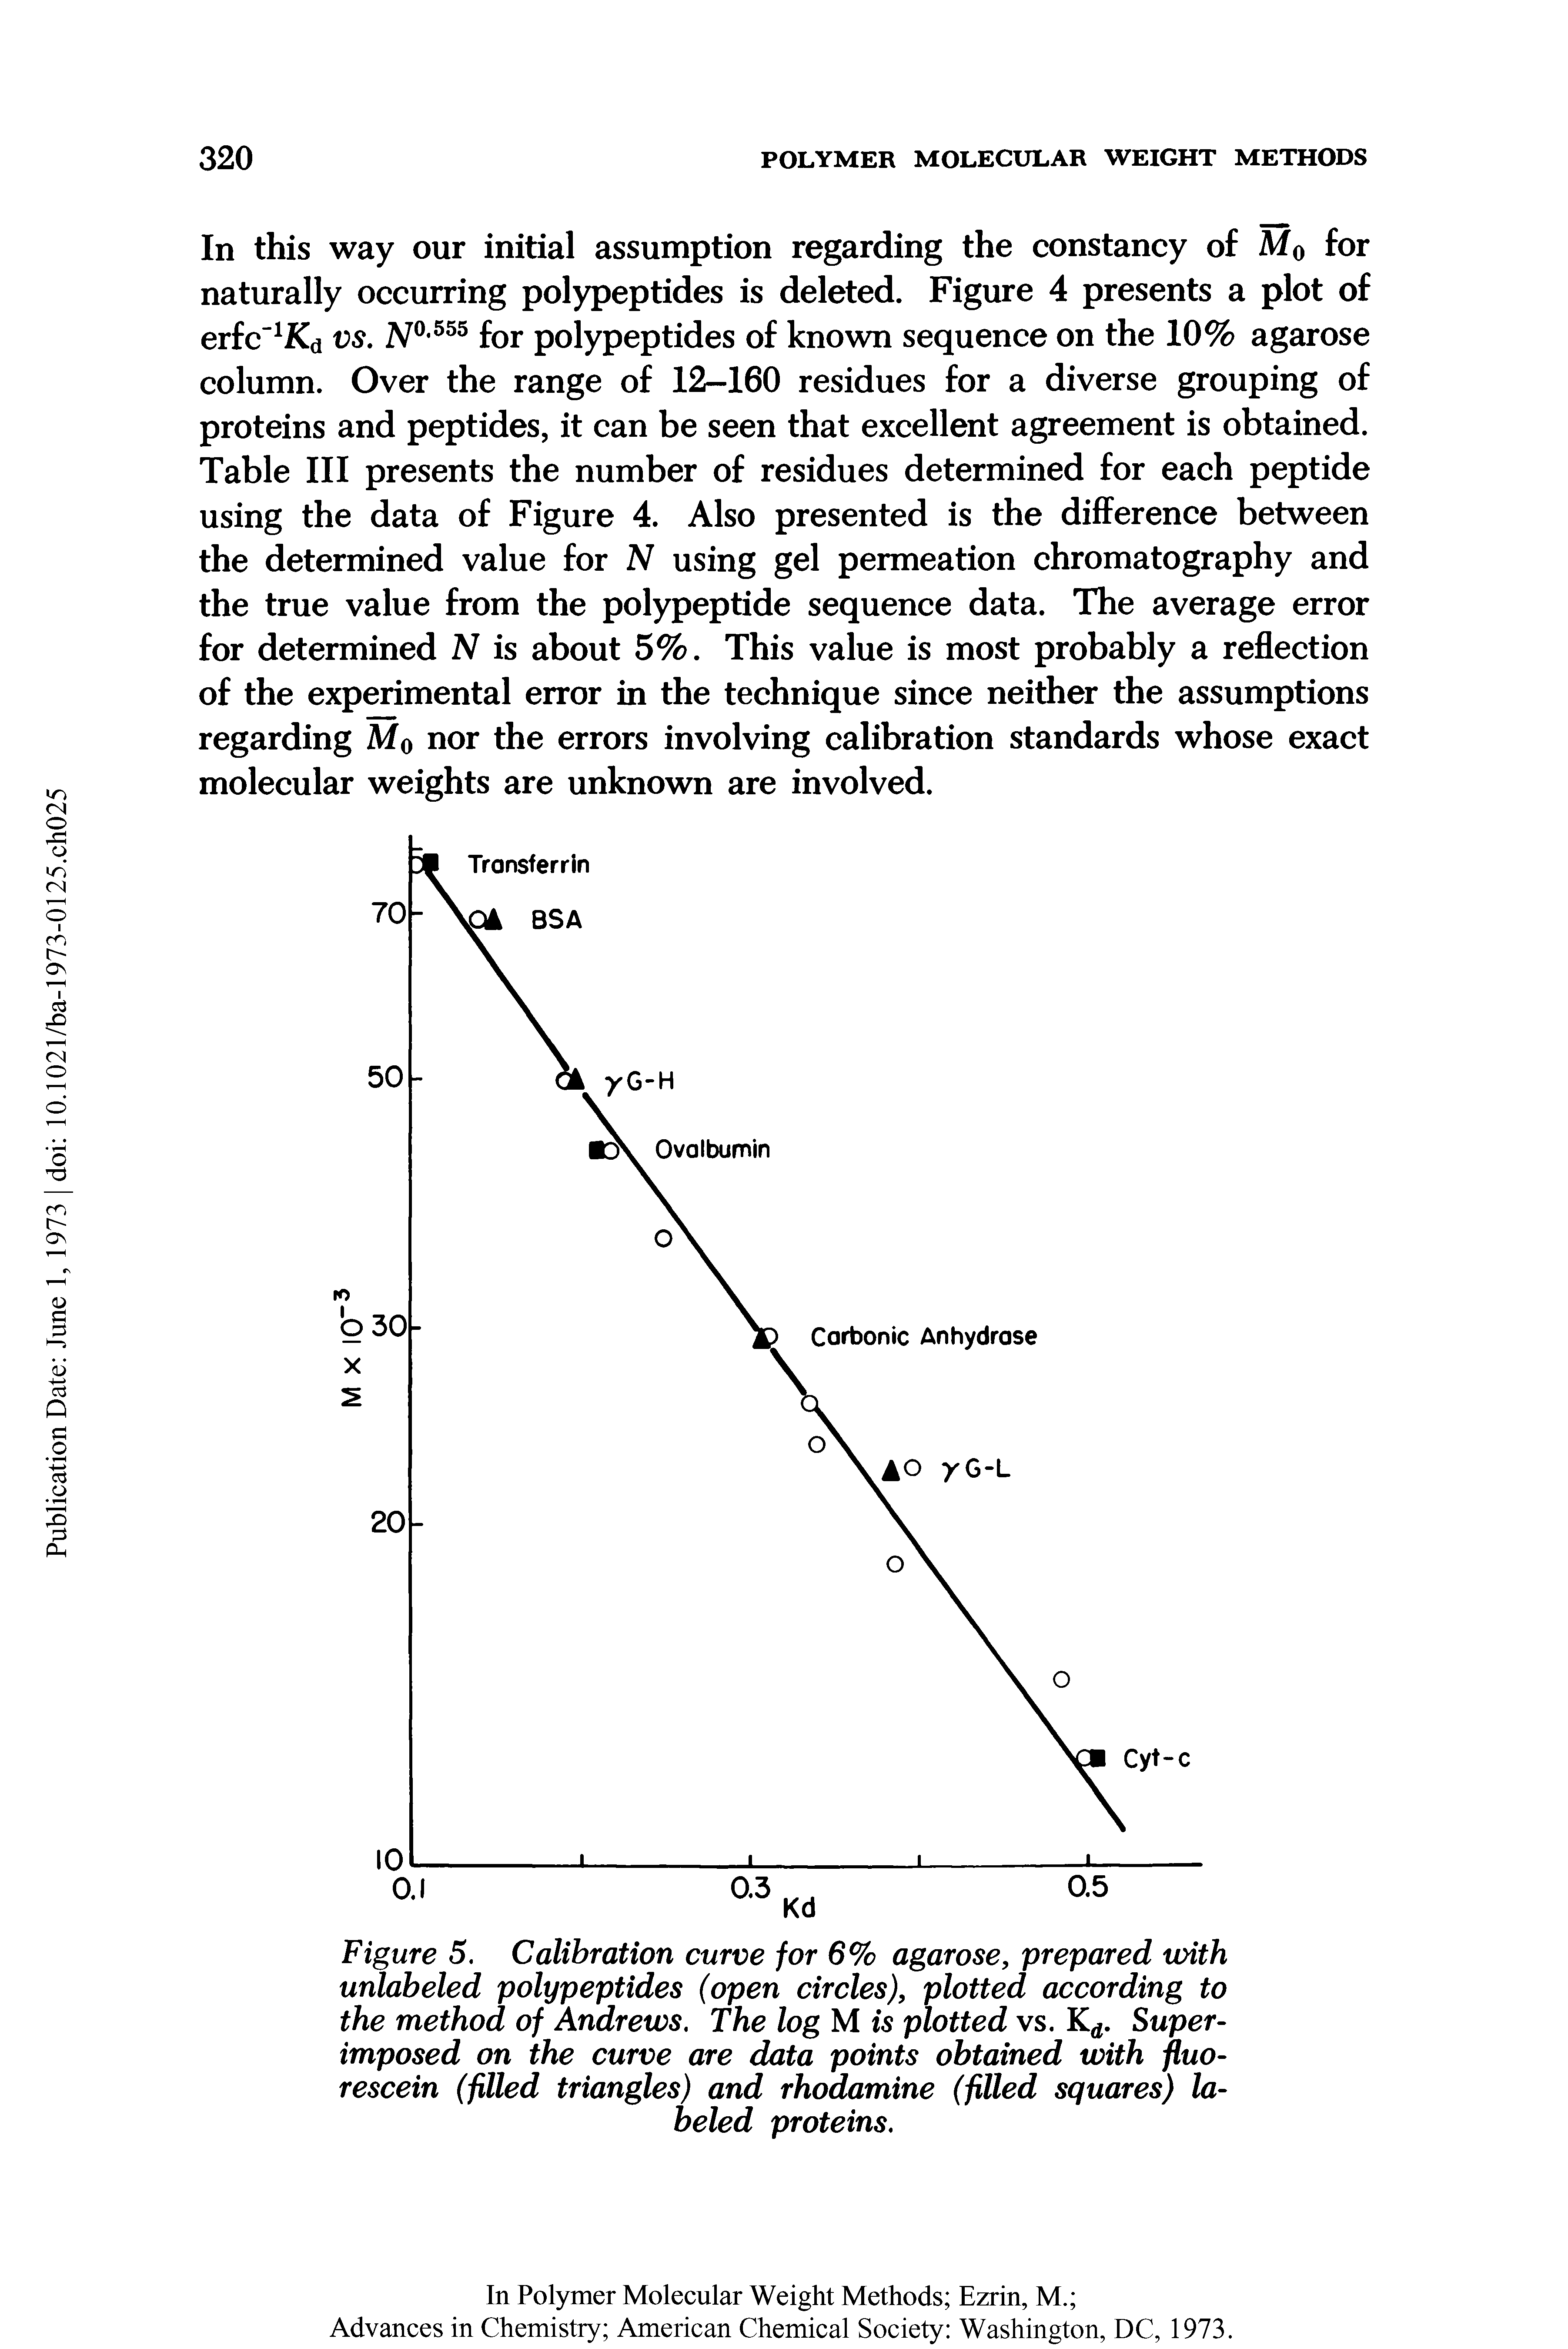 Figure 5. Calibration curve for 6% agarose, prepared with unlabeled polypeptides (open circles), plotted according to the method of Andrews. The log M is plotted vs. Kd. Super-imposed on the curve are data points obtained with fluorescein (filled triangles) and rhodamine (filled squares) labeled proteins.